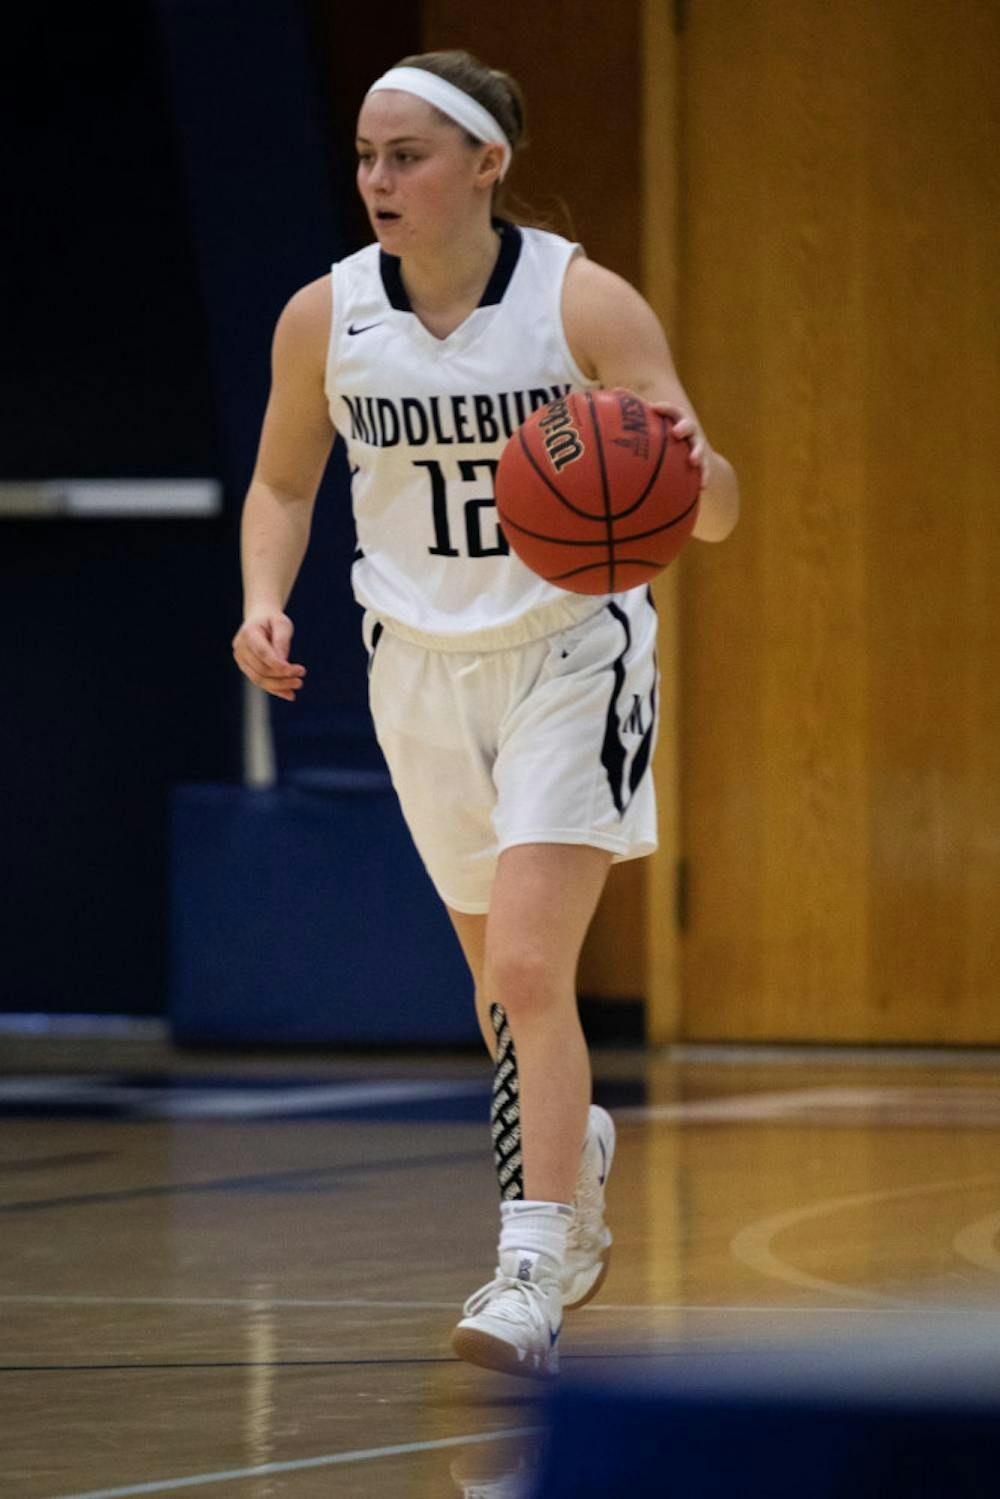 <span class="photocreditinline"><a href="https://middleburycampus.com/39670/uncategorized/michael-borenstein/">MICHAEL BORENSTEIN</a></span><br />Emily Wander ’21 averaged 7.2 points per game throughout the season.